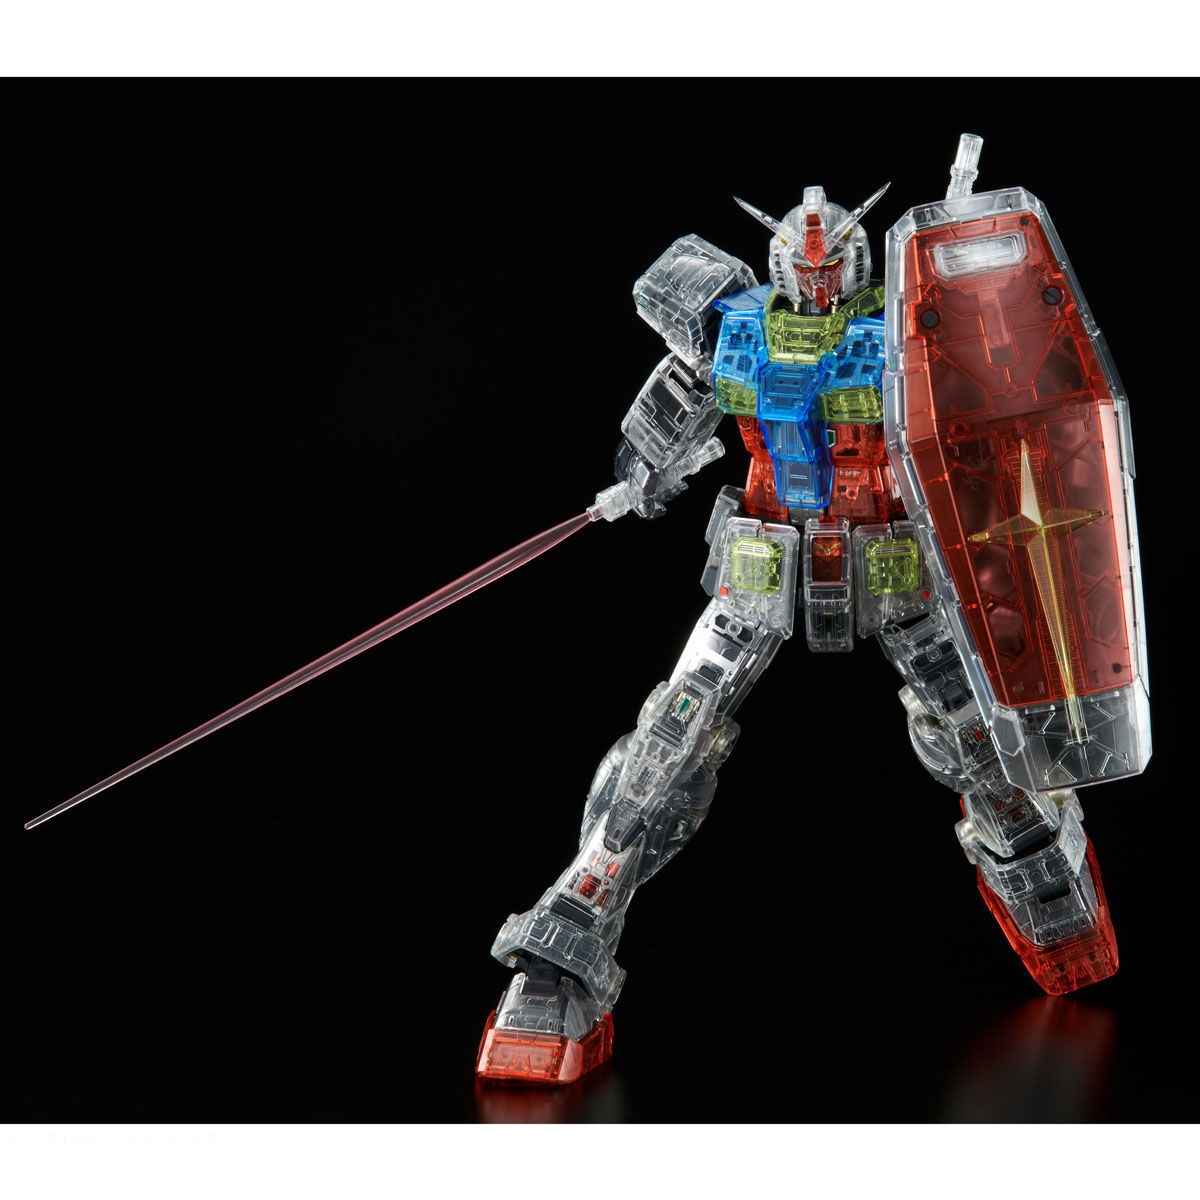 PG UNLEASHED 1⁄60 CLEAR COLOR BODY FOR RX-78-2 GUNDAM | GUNDAM | PREMIUM  BANDAI USA Online Store for Action Figures, Model Kits, Toys and more